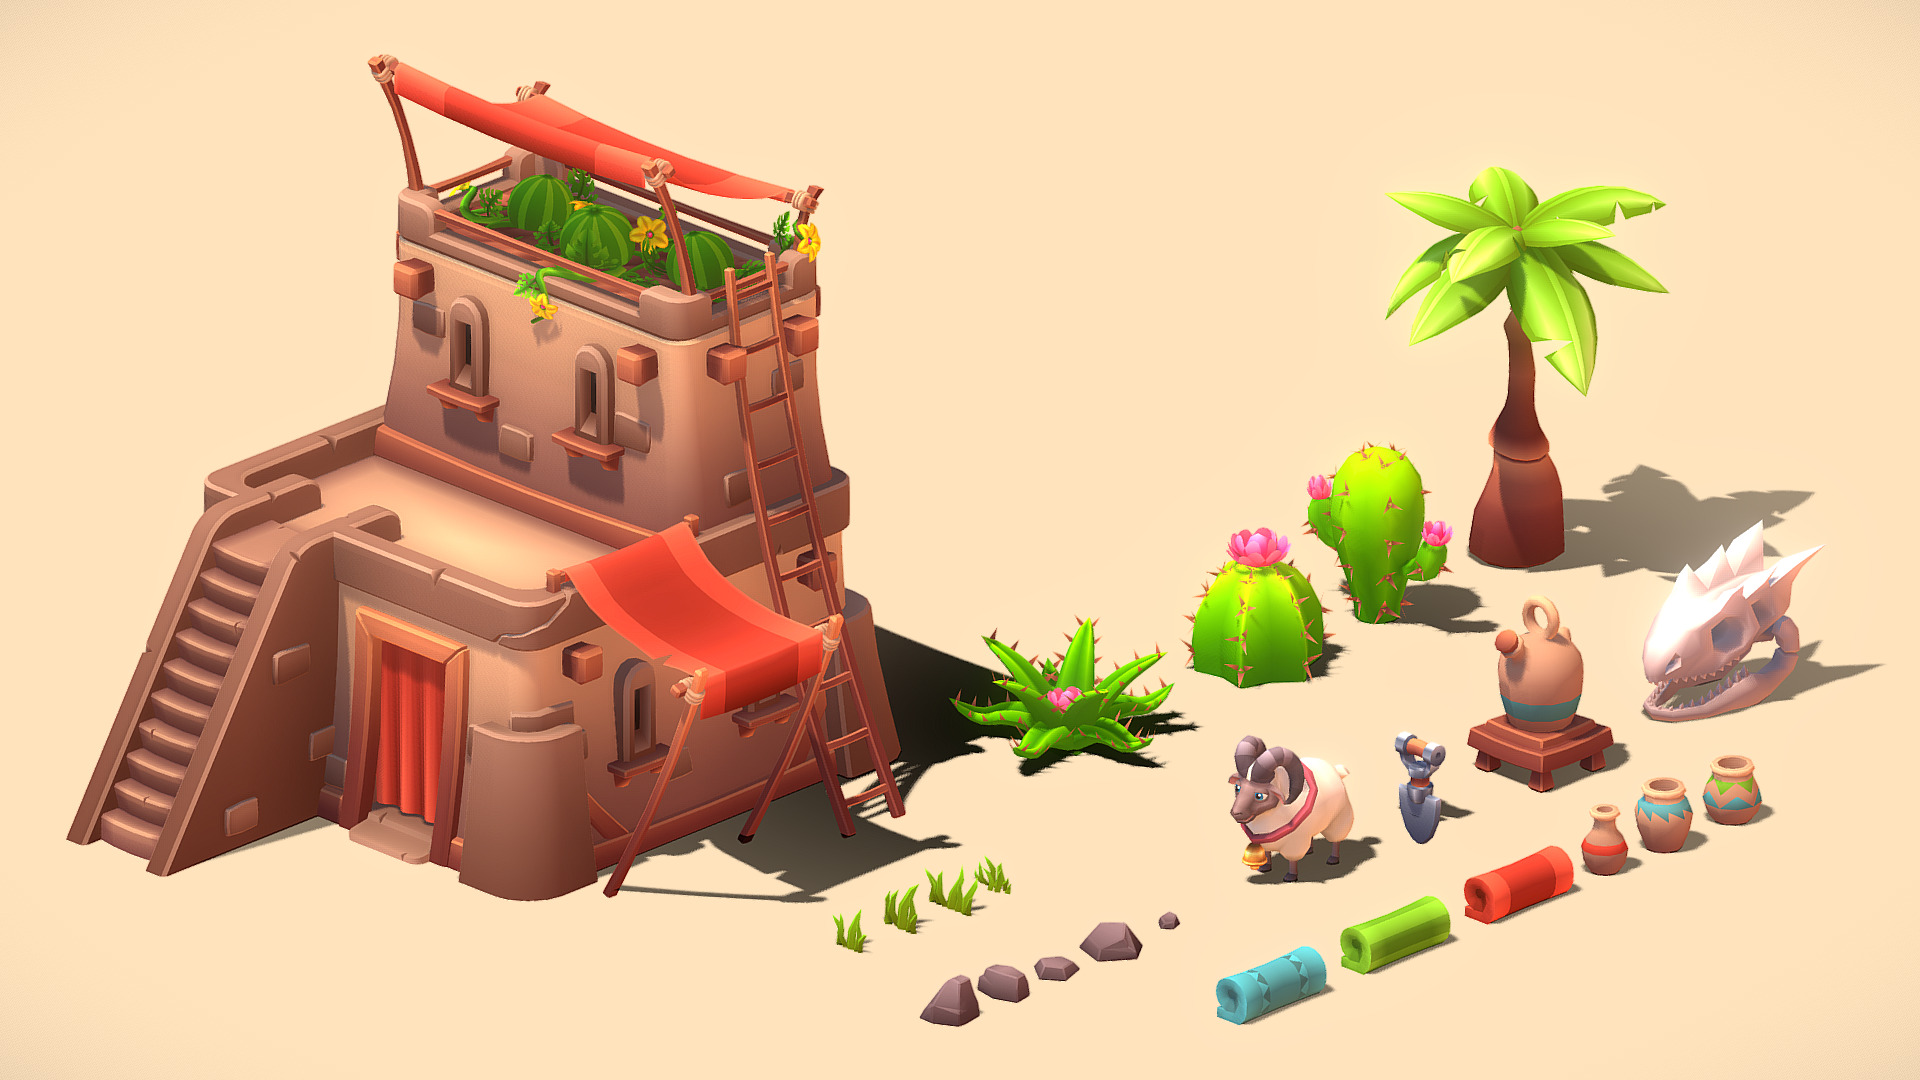 3D model Asset Set – Gradient Desert - This is a 3D model of the Asset Set - Gradient Desert. The 3D model is about a toy house made of building blocks.